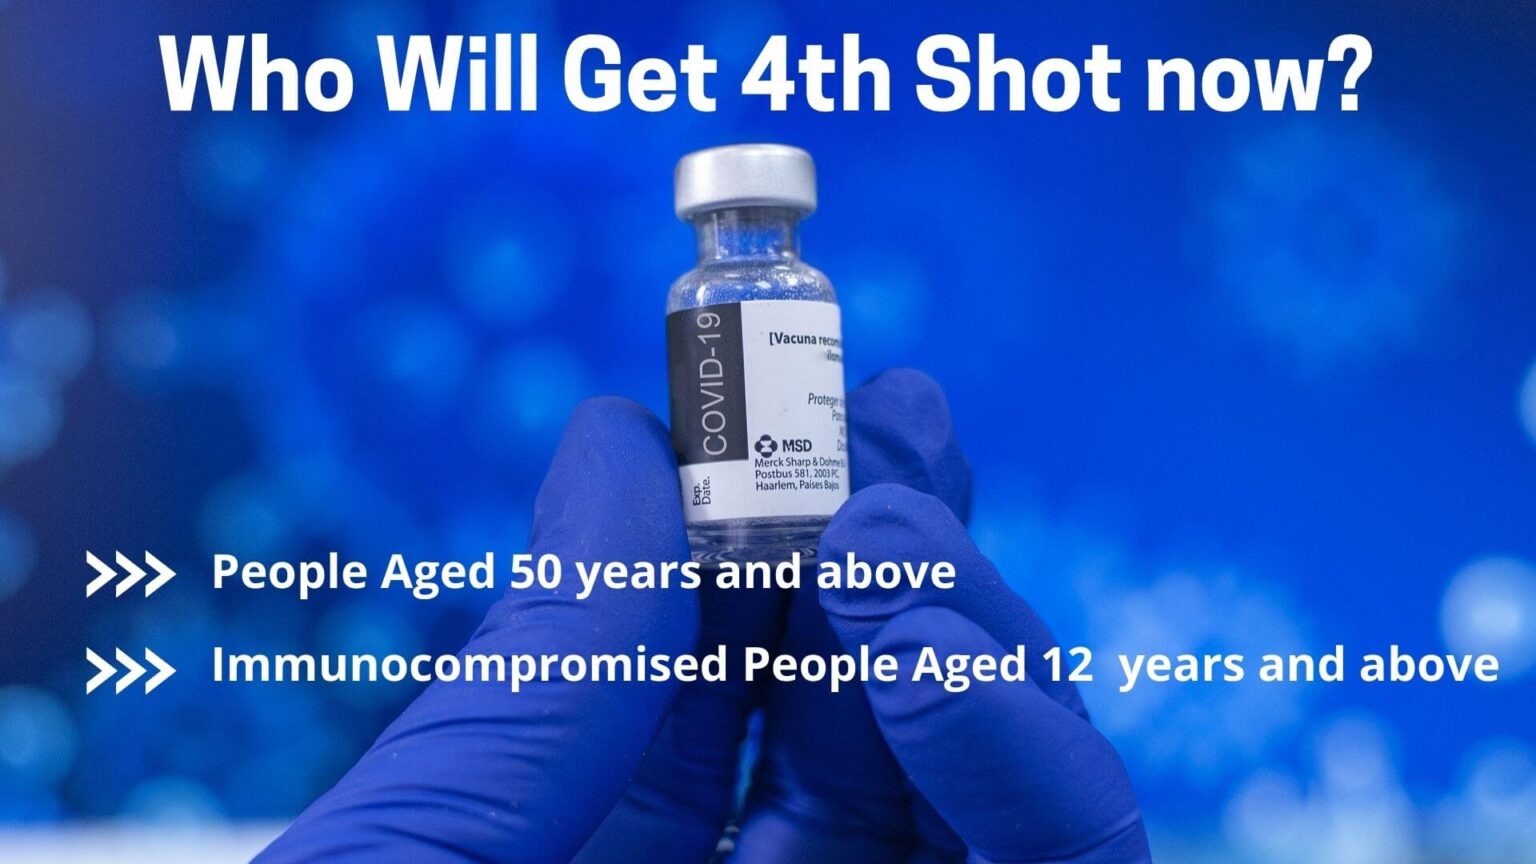 Who will get 4th Shot now?